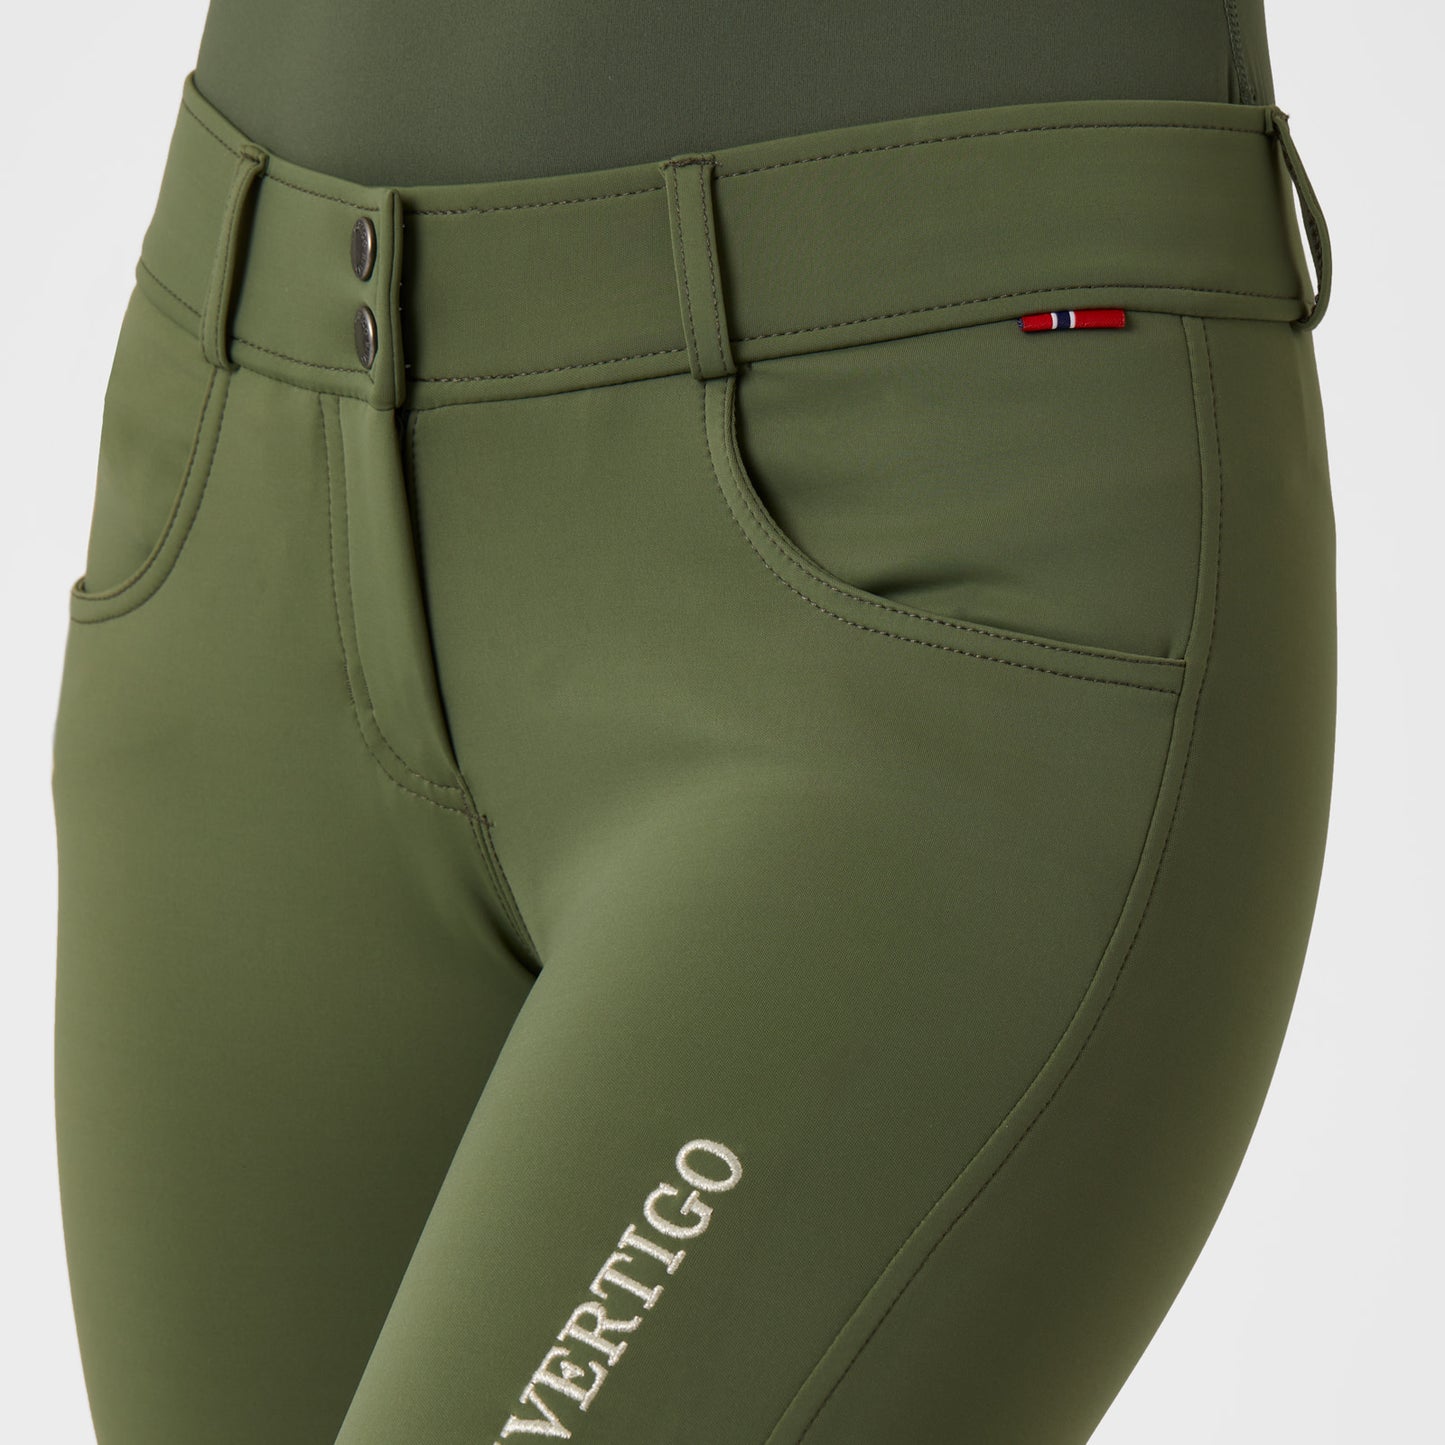 Meghan Low Rise Full Seat Breeches || LIMITED SIZES